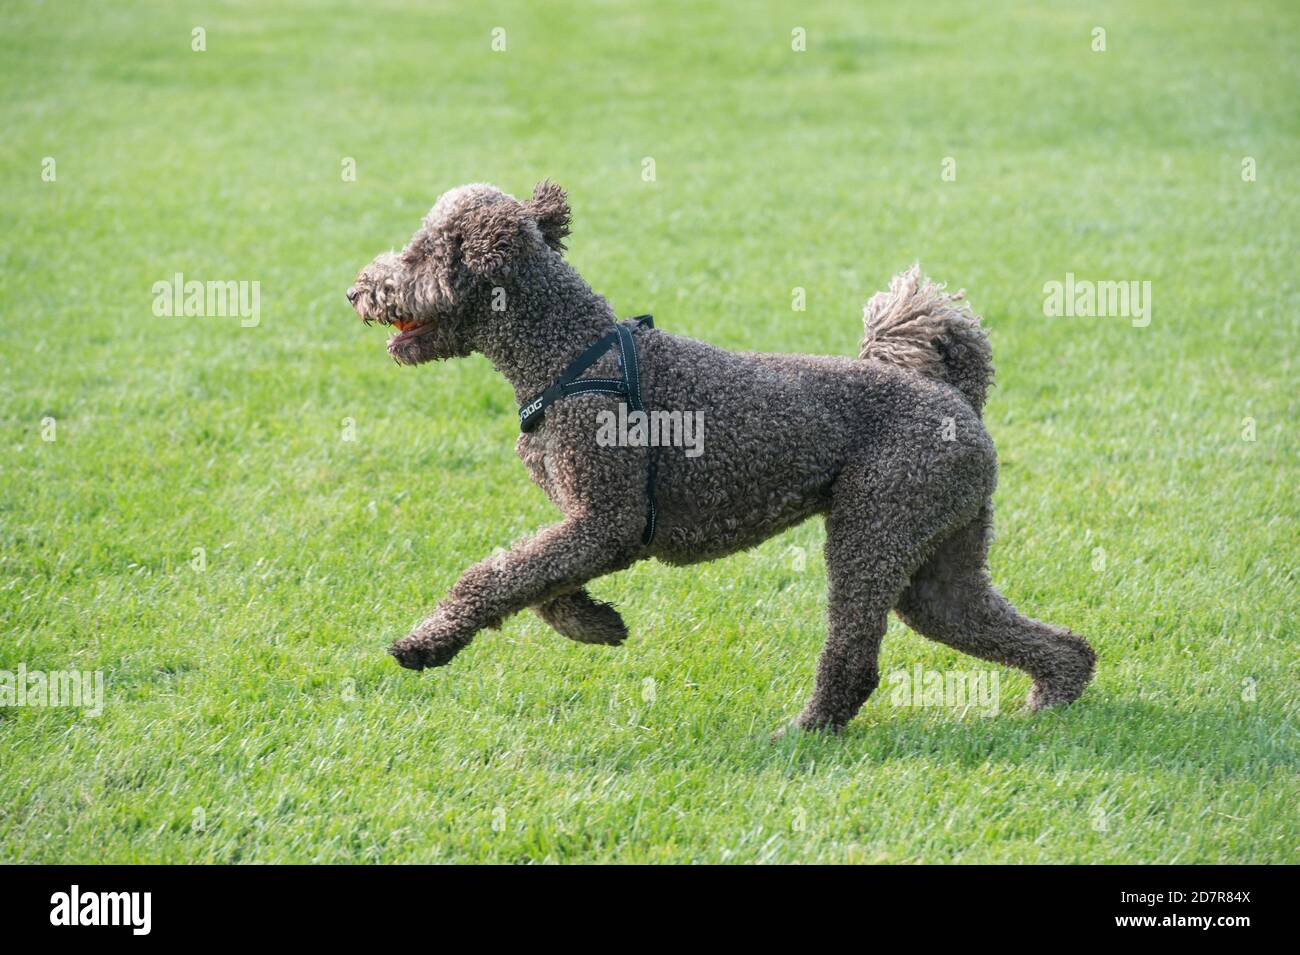 Standard poodle running on lawn Stock Photo